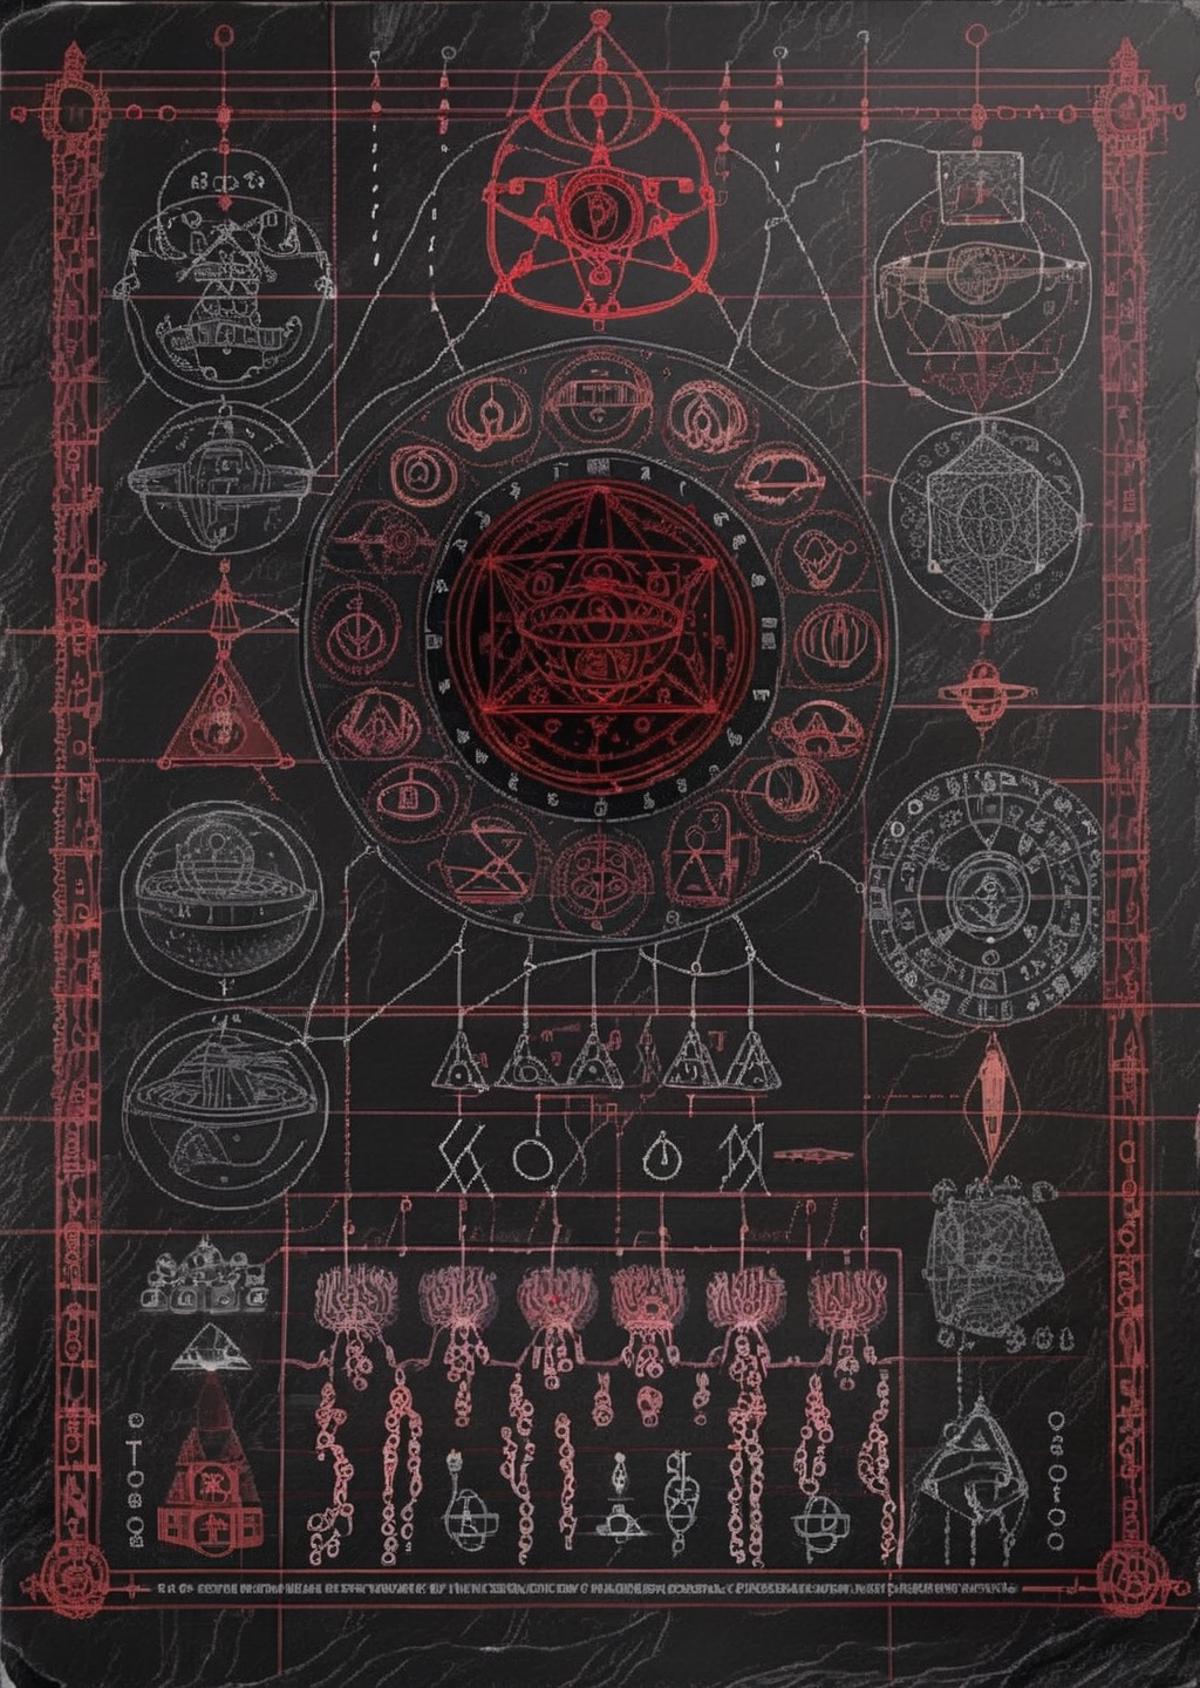 Mysterious Black and Red Symbols and Drawings on the Wall